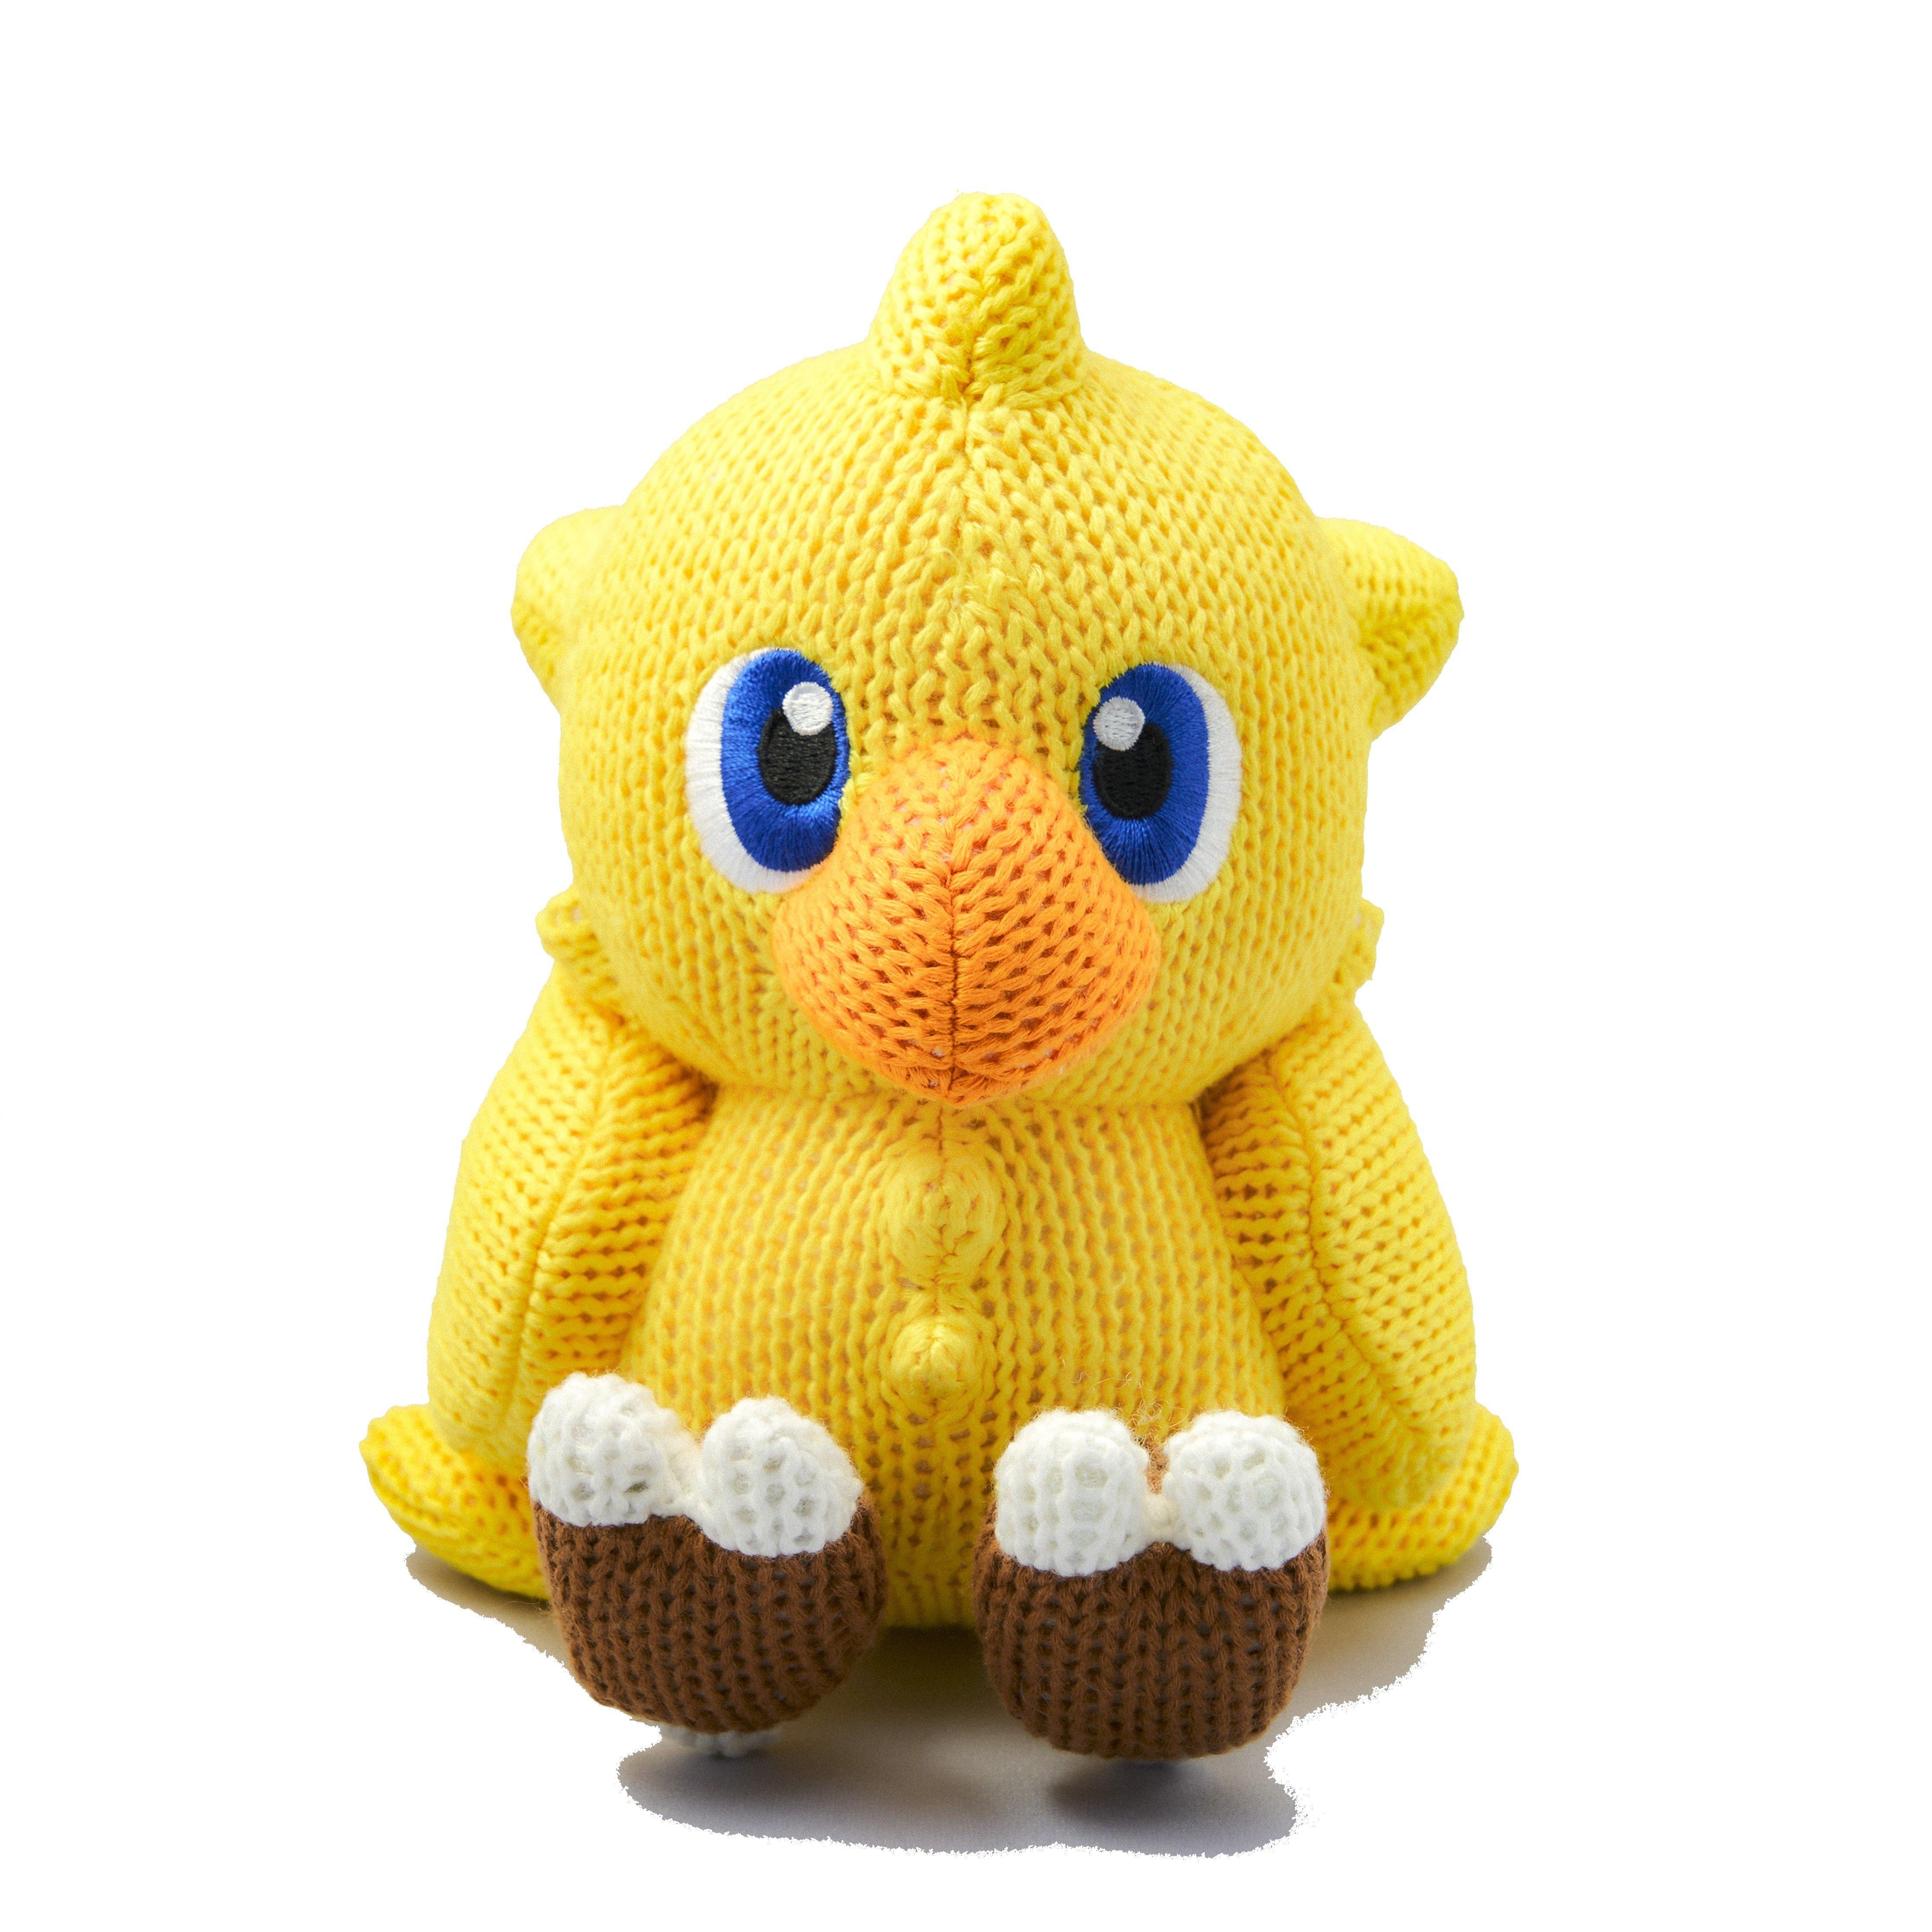 FINAL FANTASY Chocobo Knitted 5.51-in Plush